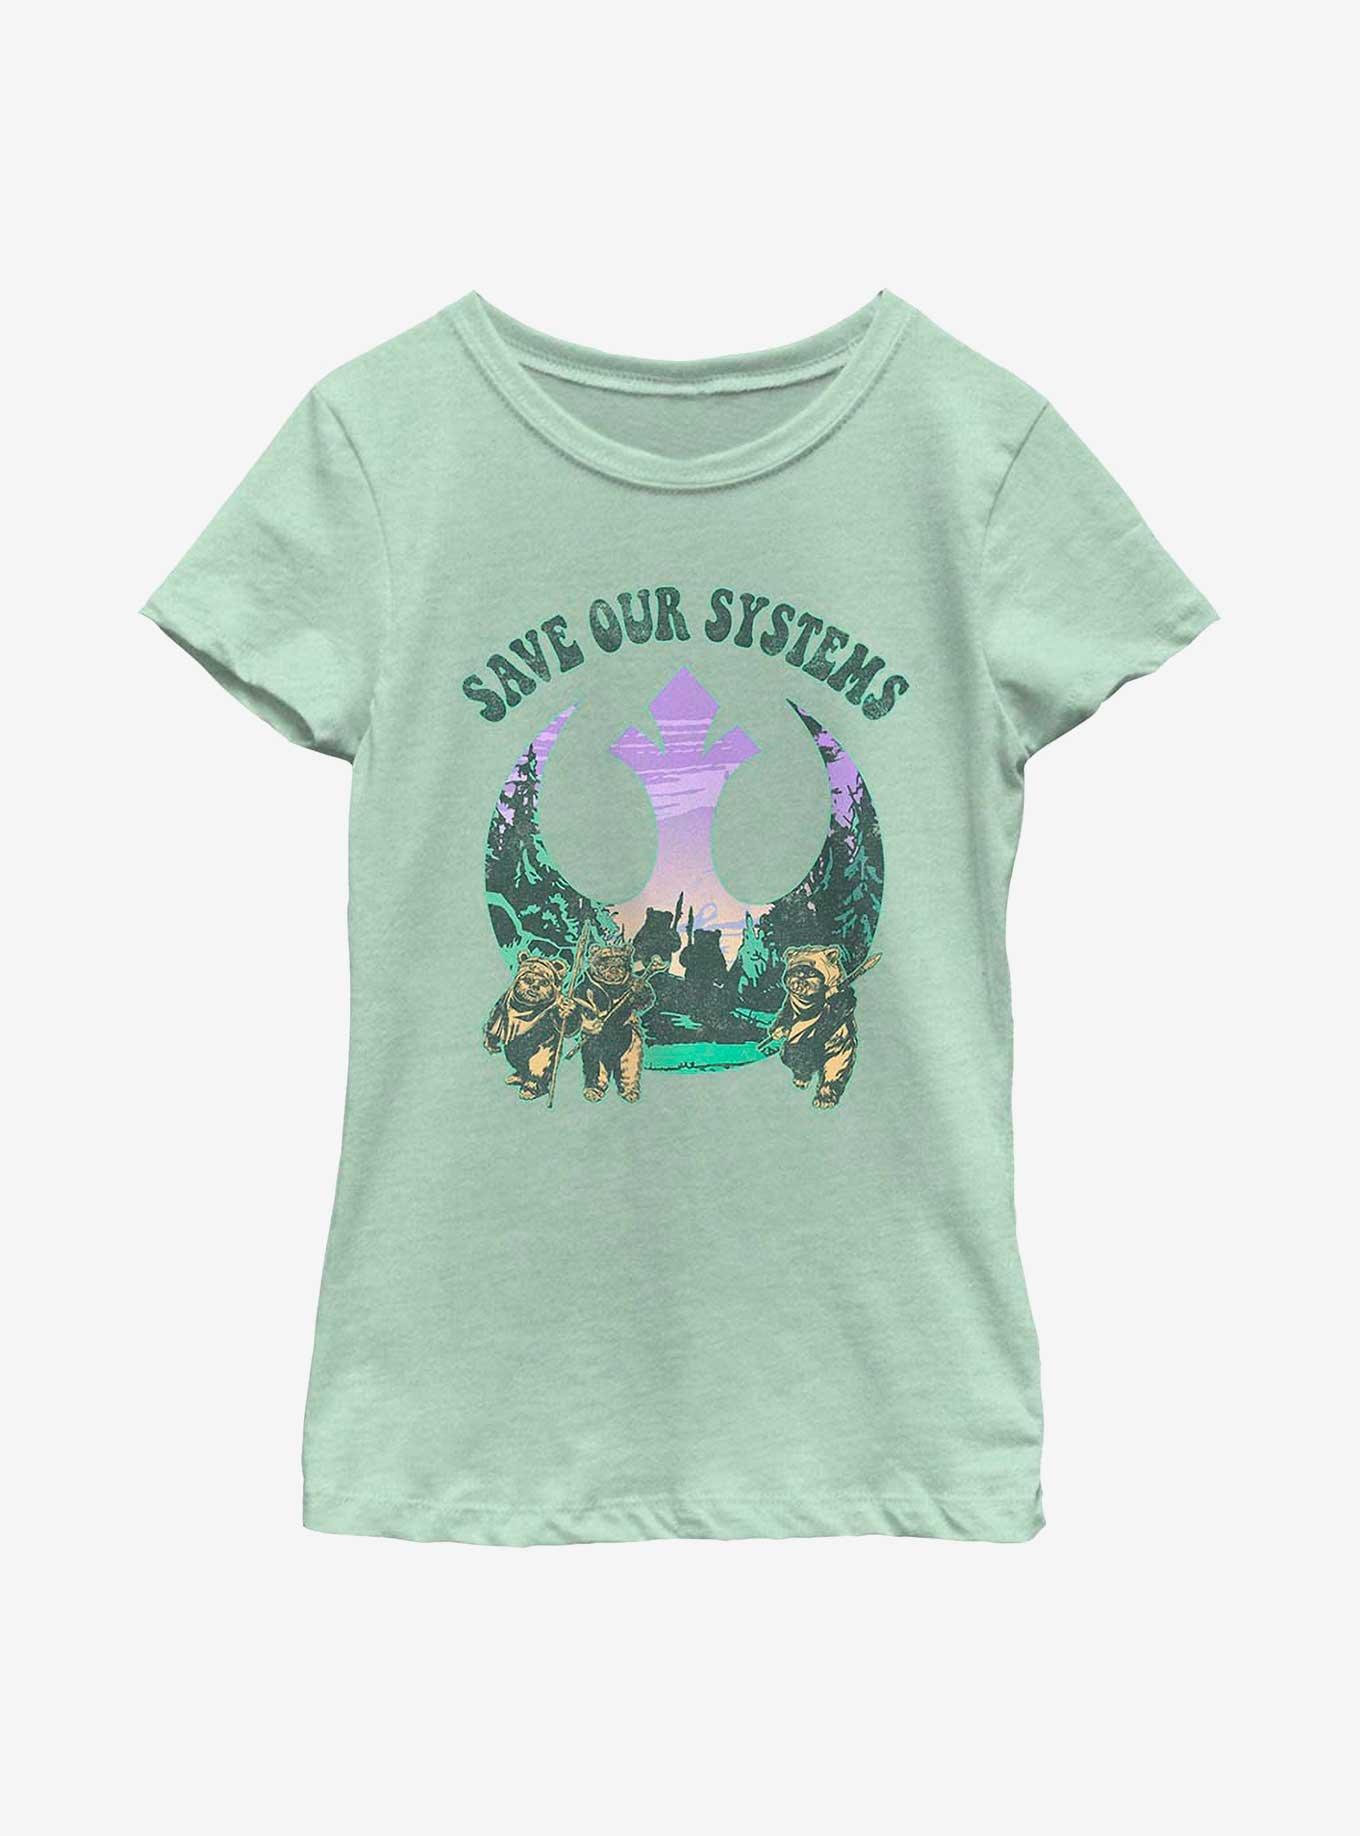 Star Wars Save Our Systems Ewok Youth Girls T-Shirt, MINT, hi-res